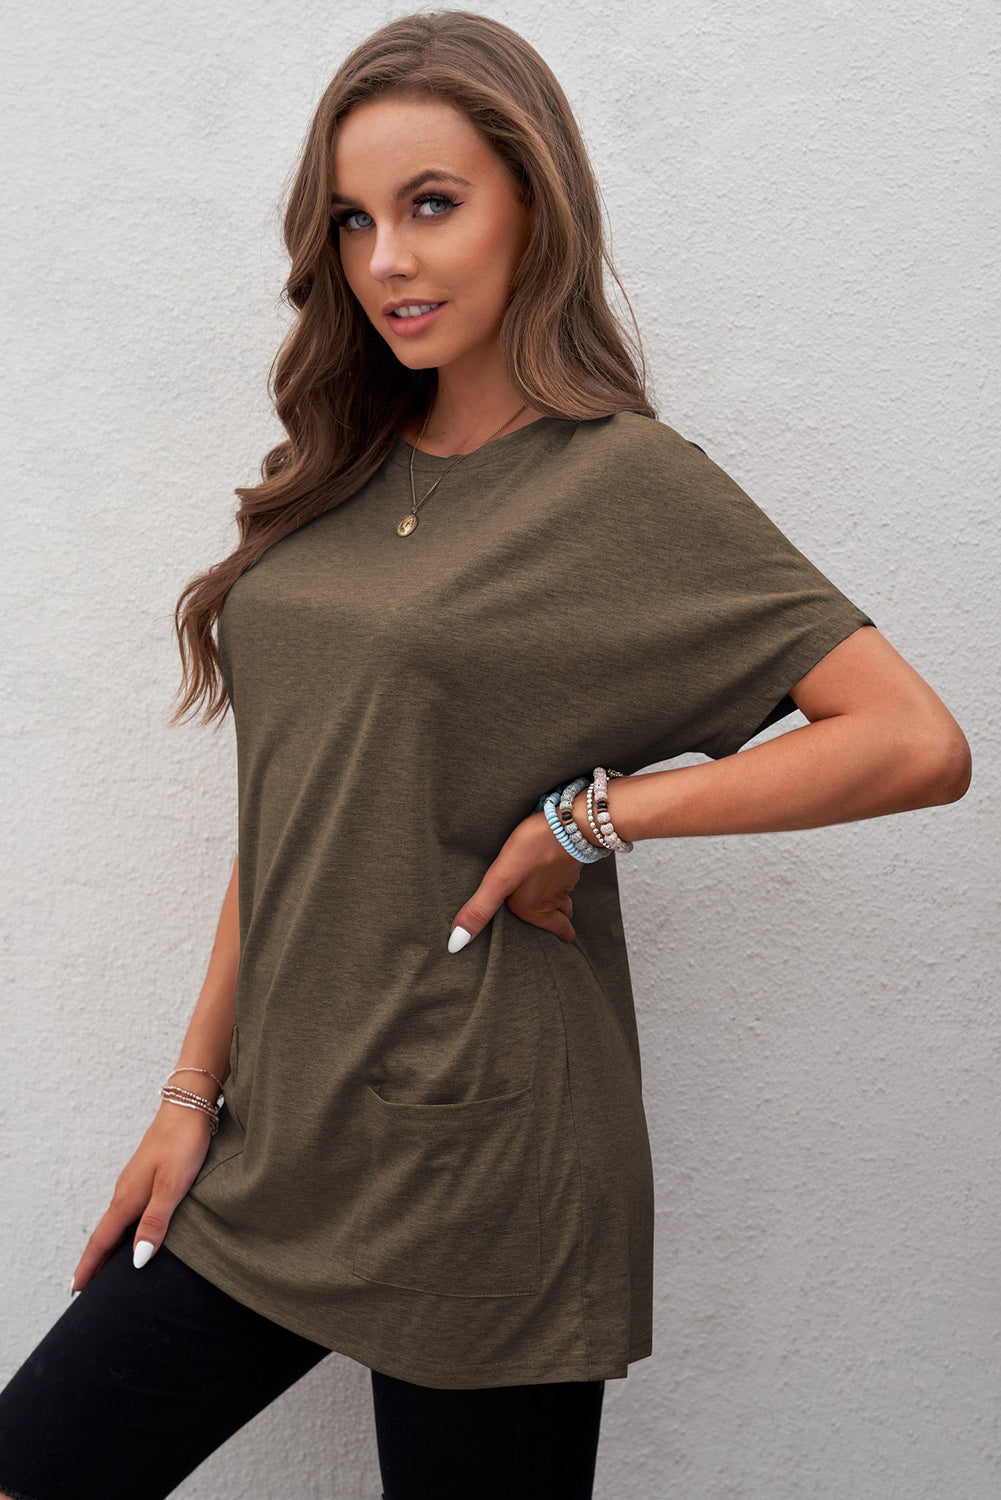 Short Sleeve Round Neck Tee Shirt with Pockets - T-Shirts - Shirts & Tops - 4 - 2024